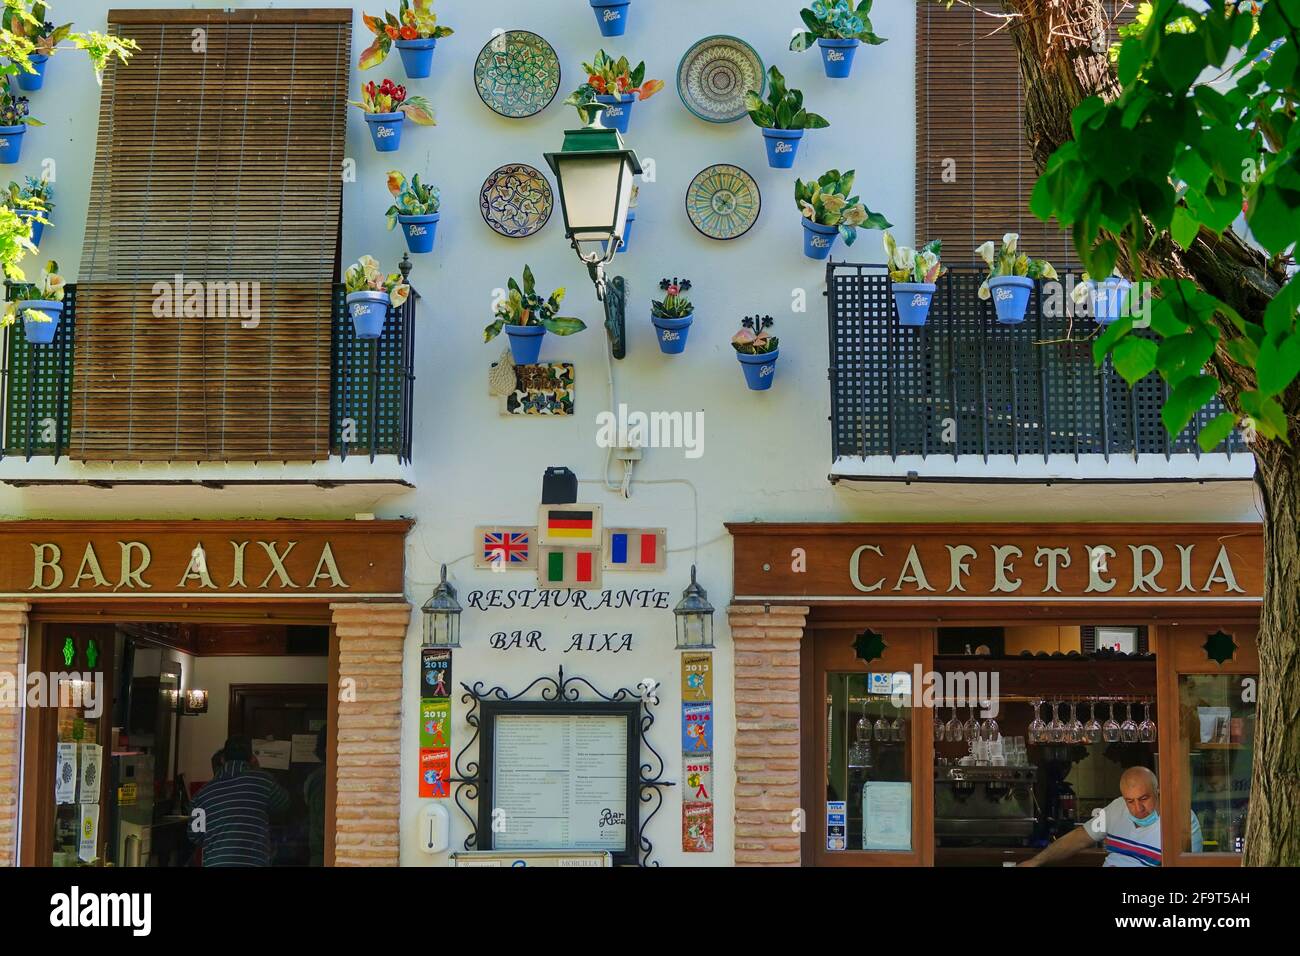 Facade with colorful ceramic decorations of a traditional cafeteria in the Albaicín neighborhood of Granada (Spain) with the waiter at the entrance Stock Photo